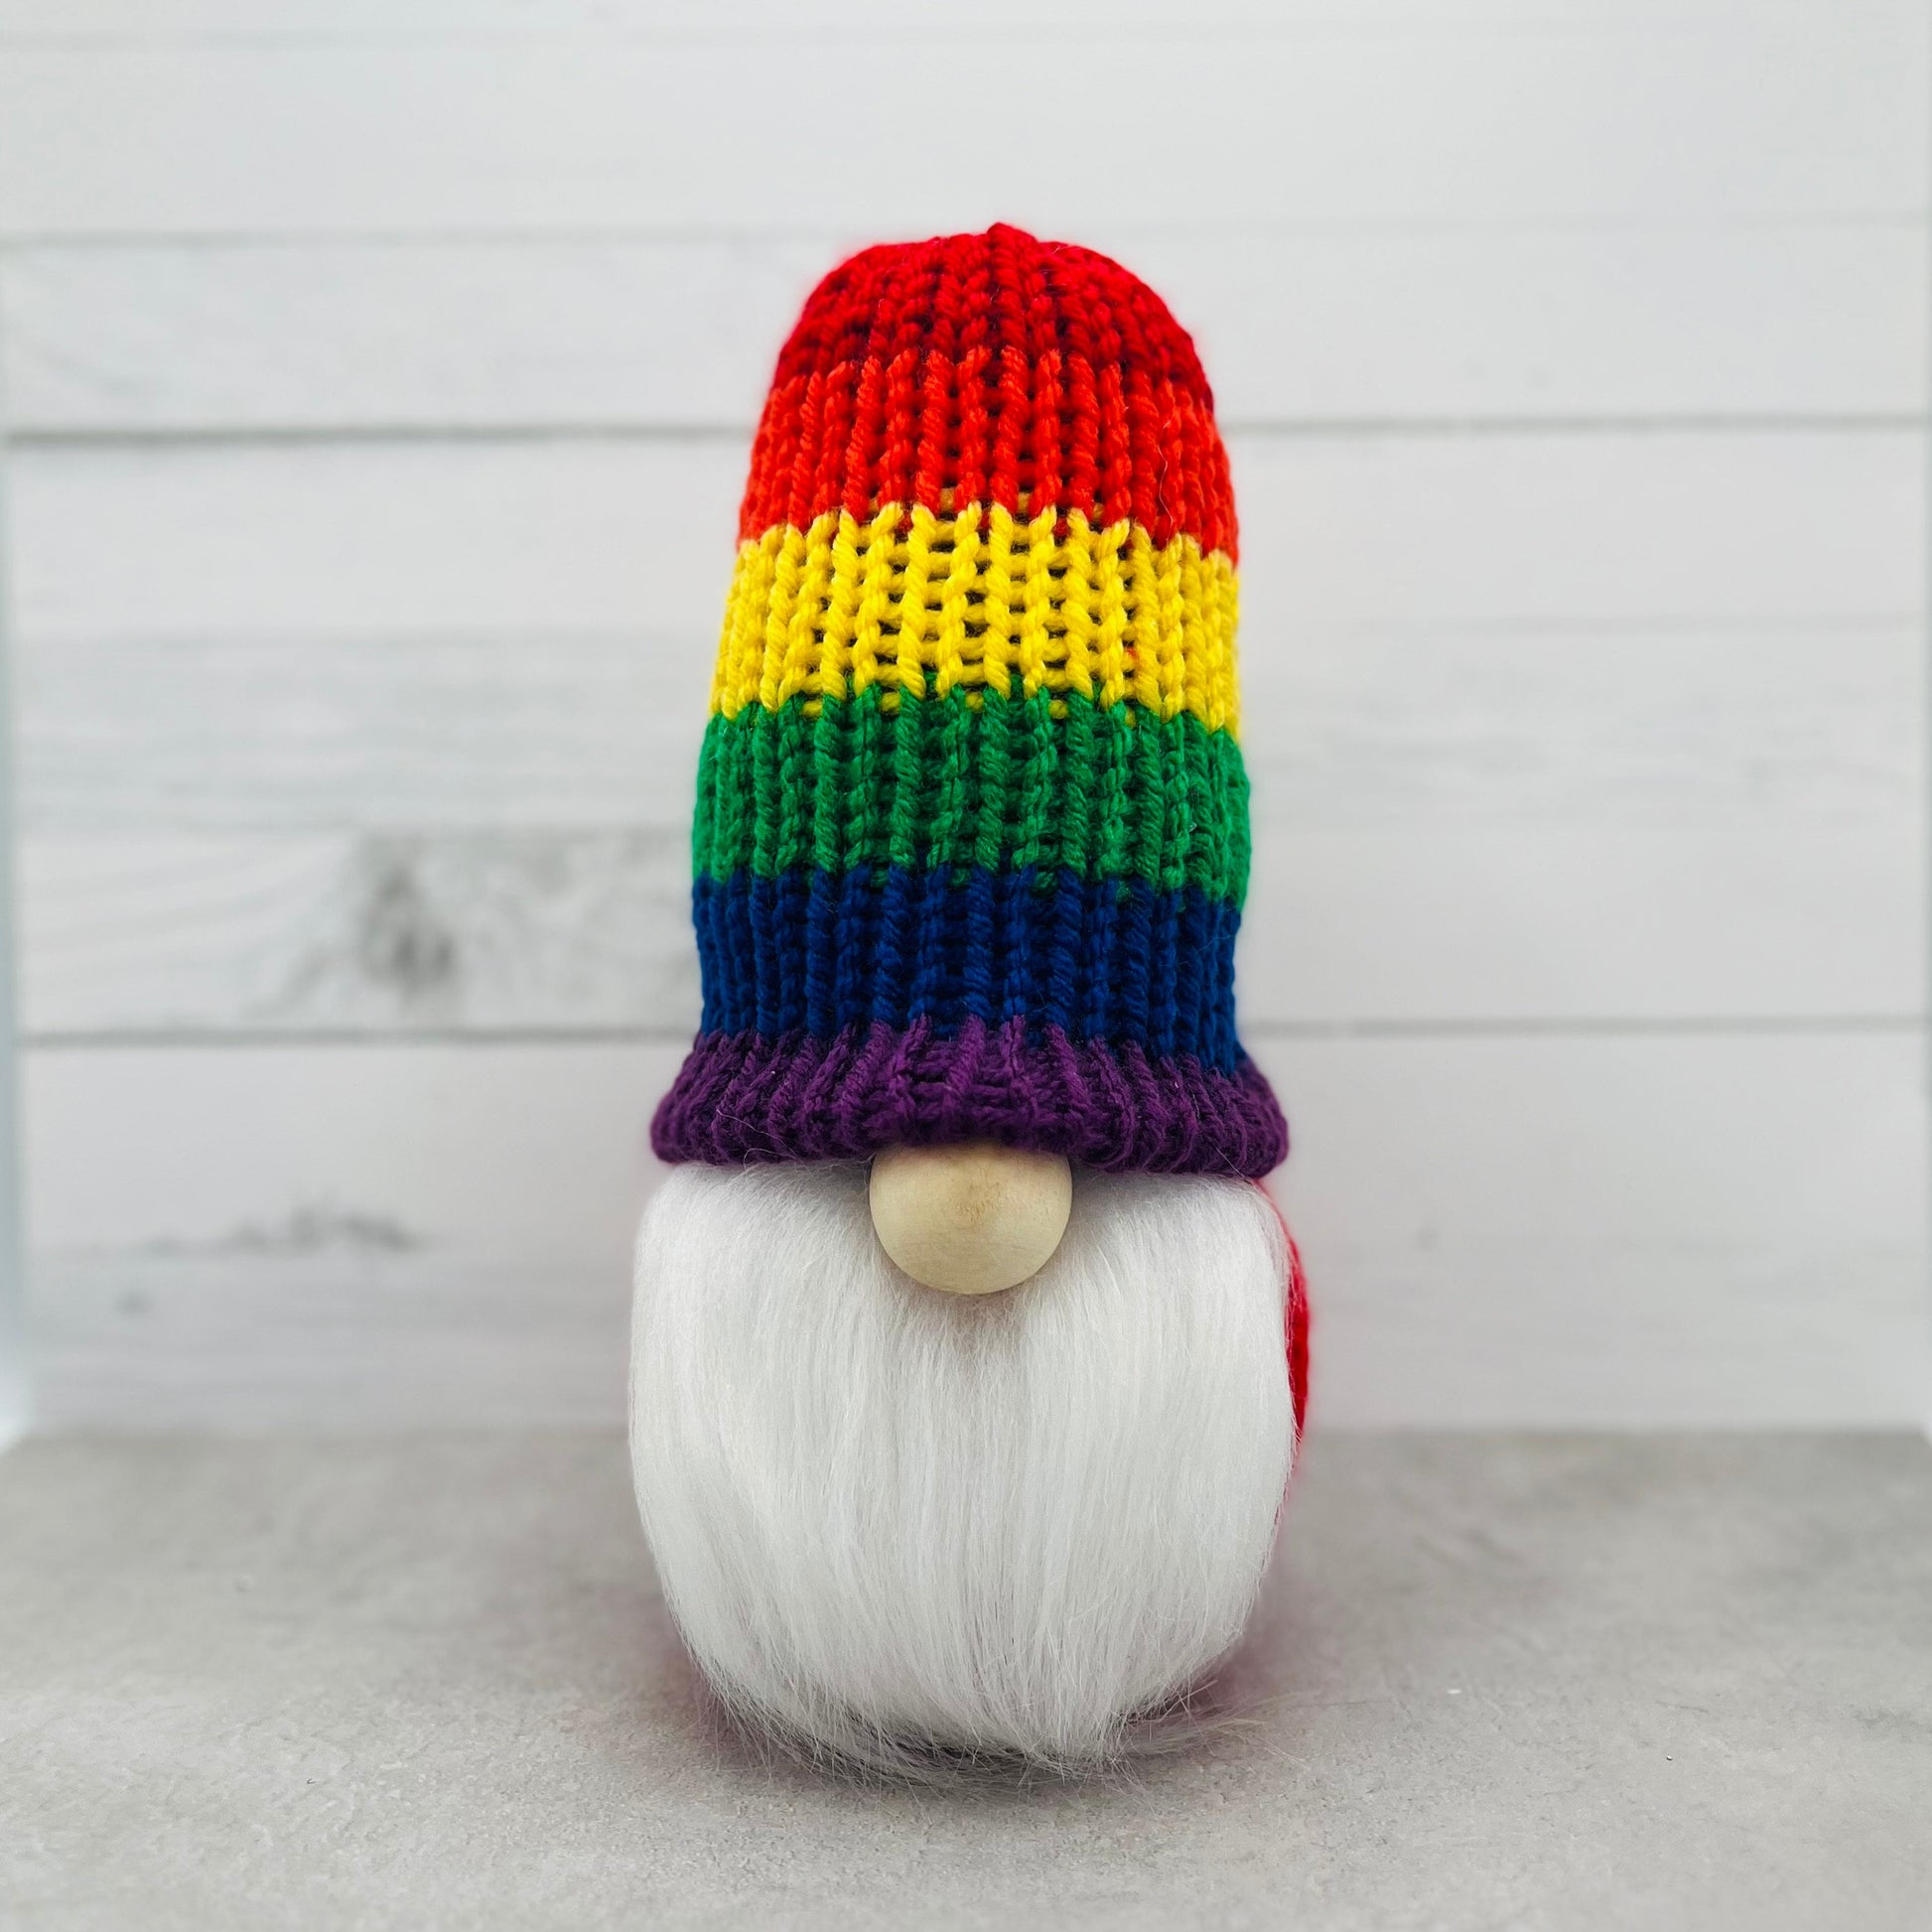 An 8" tall gnome with a rainbow hat with horizontal stripes starting with red at the top then orange, yellow, green, blue and finally purple.  He has a 1" round wood bead for his nose and a white faux fur beard.  His body and hat are knit with yard and filled with dried beans and poly stuffing.